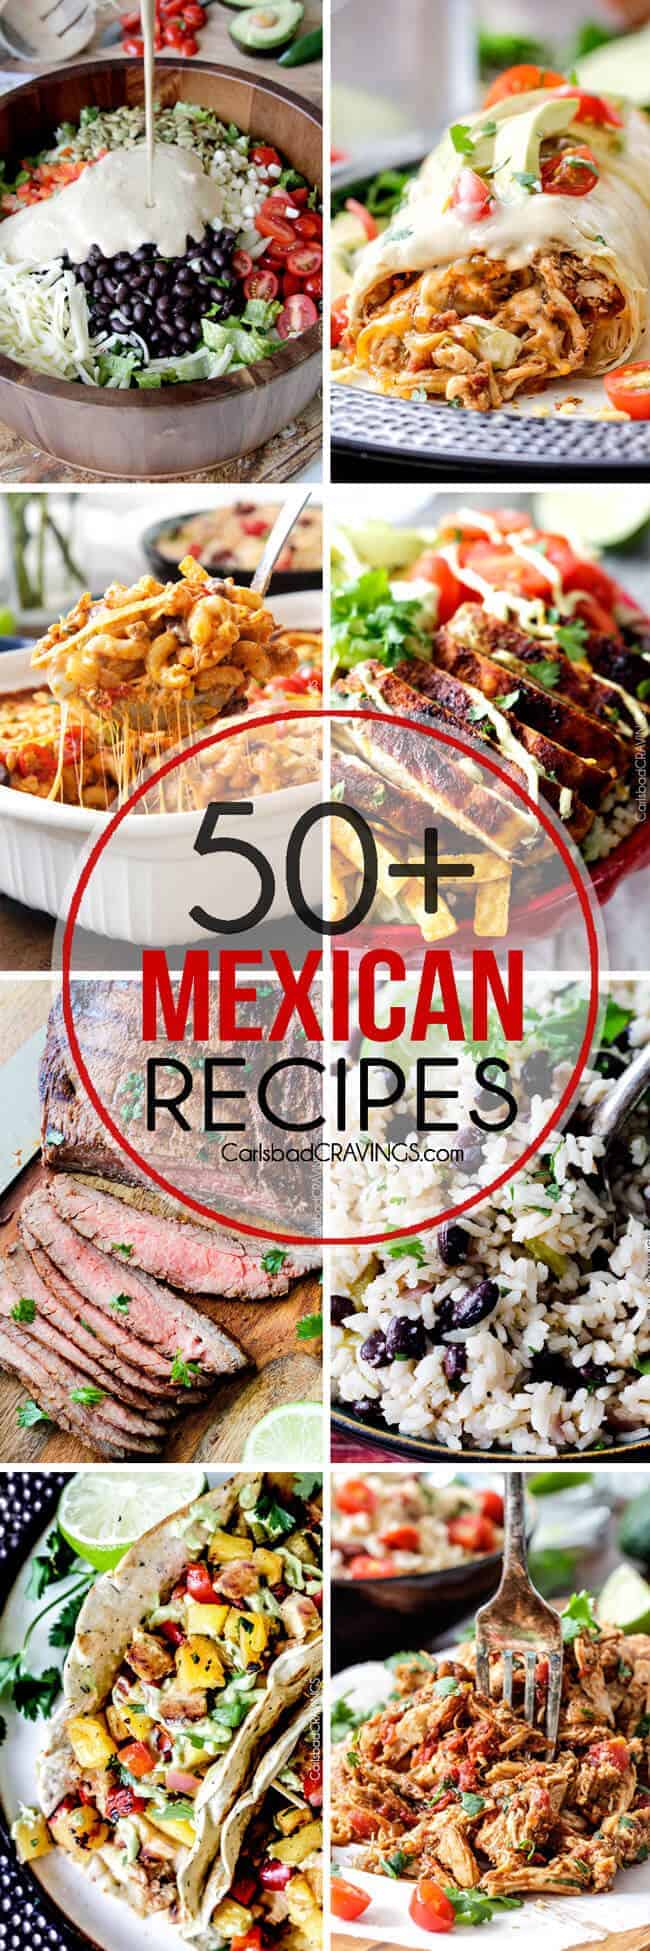 Over 50 Mexican Recipes - Carlsbad Cravings